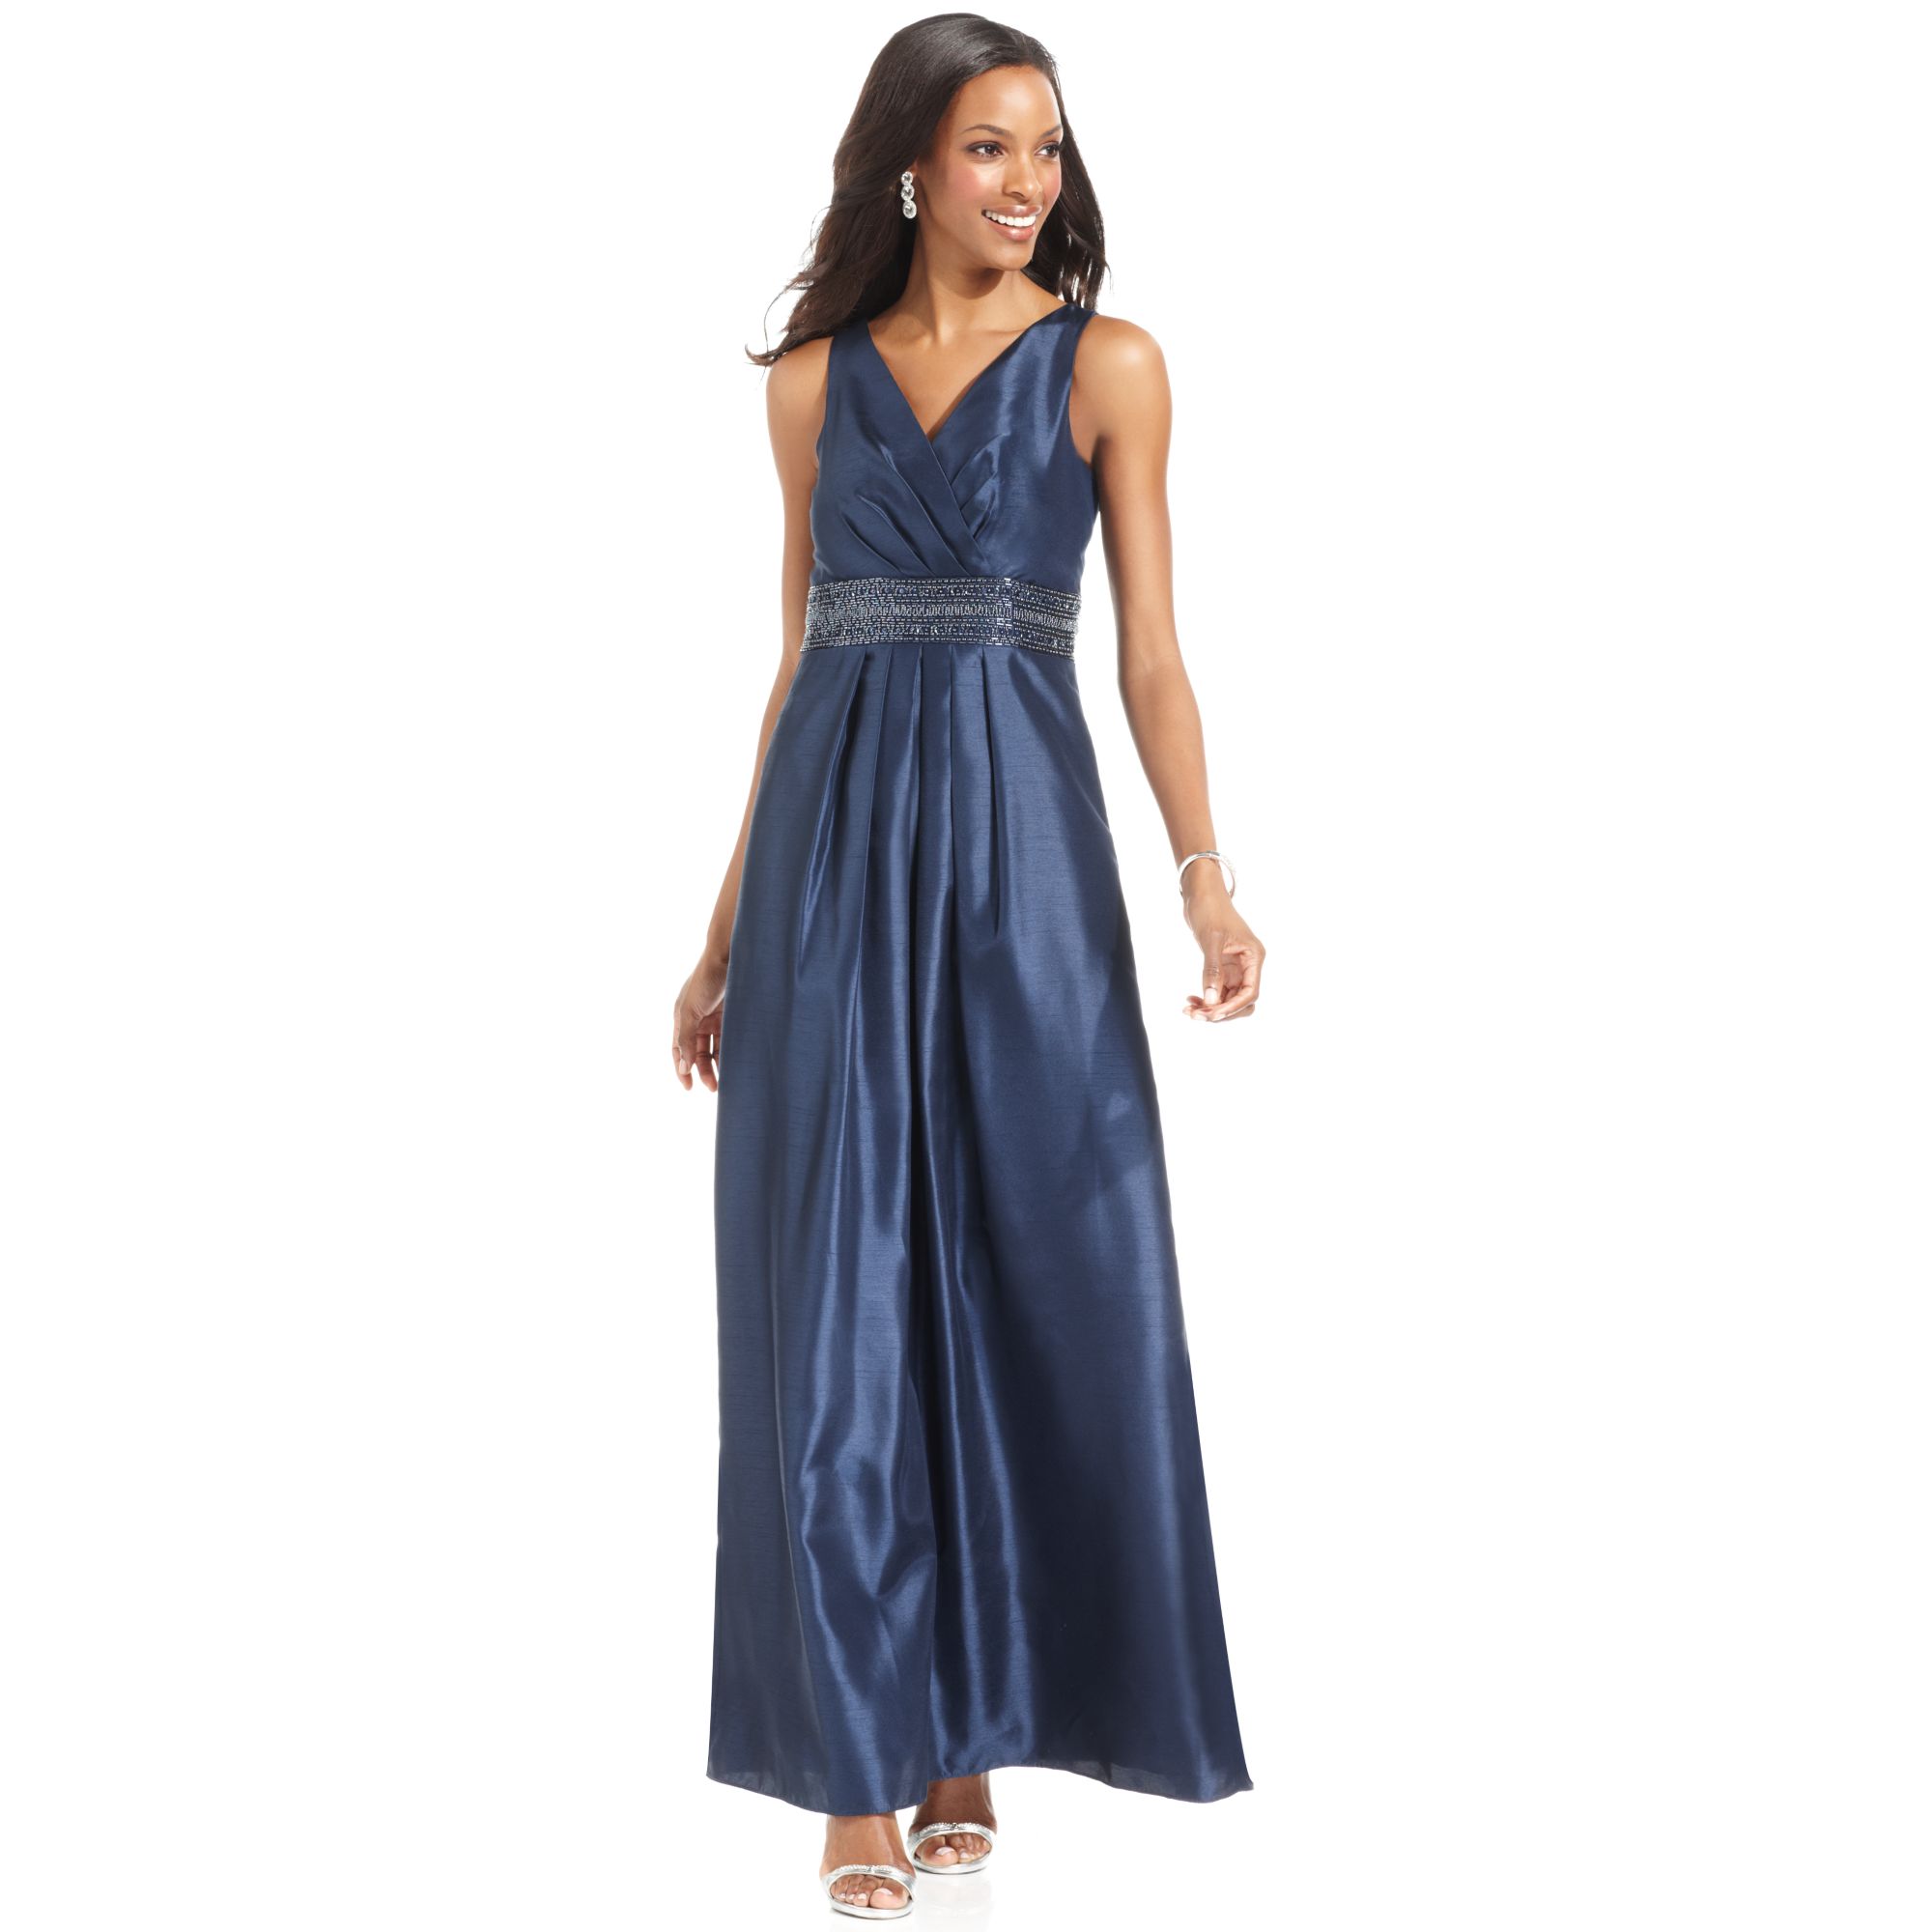 Lyst - Js Boutique Sleeveless Beaded Gown in Blue